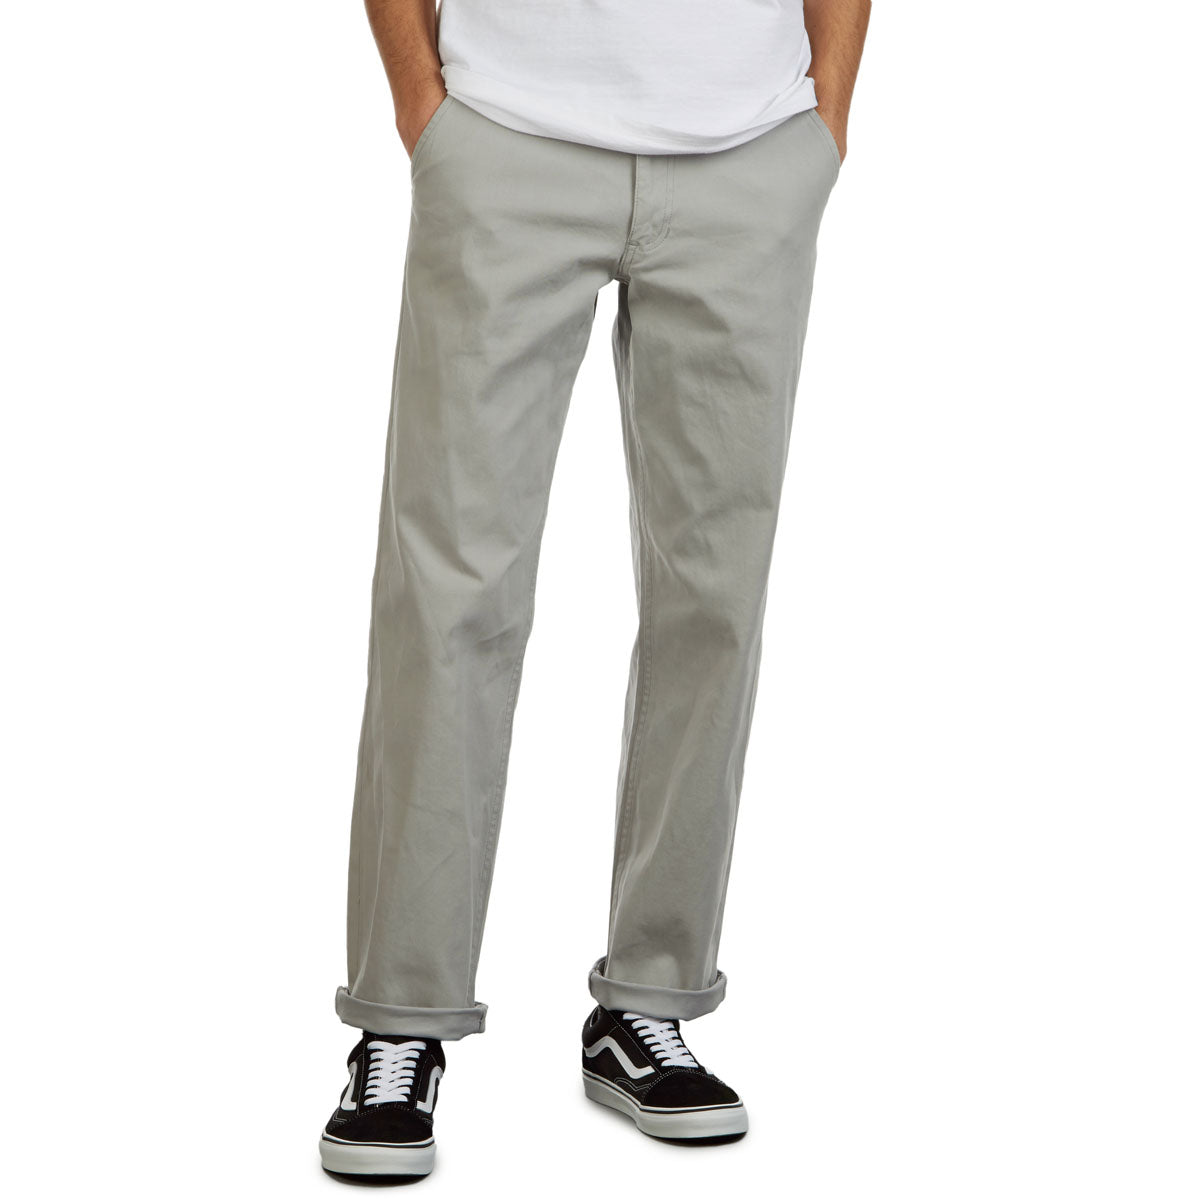 CCS Standard Plus Relaxed Chino Pants - Dove Grey image 4